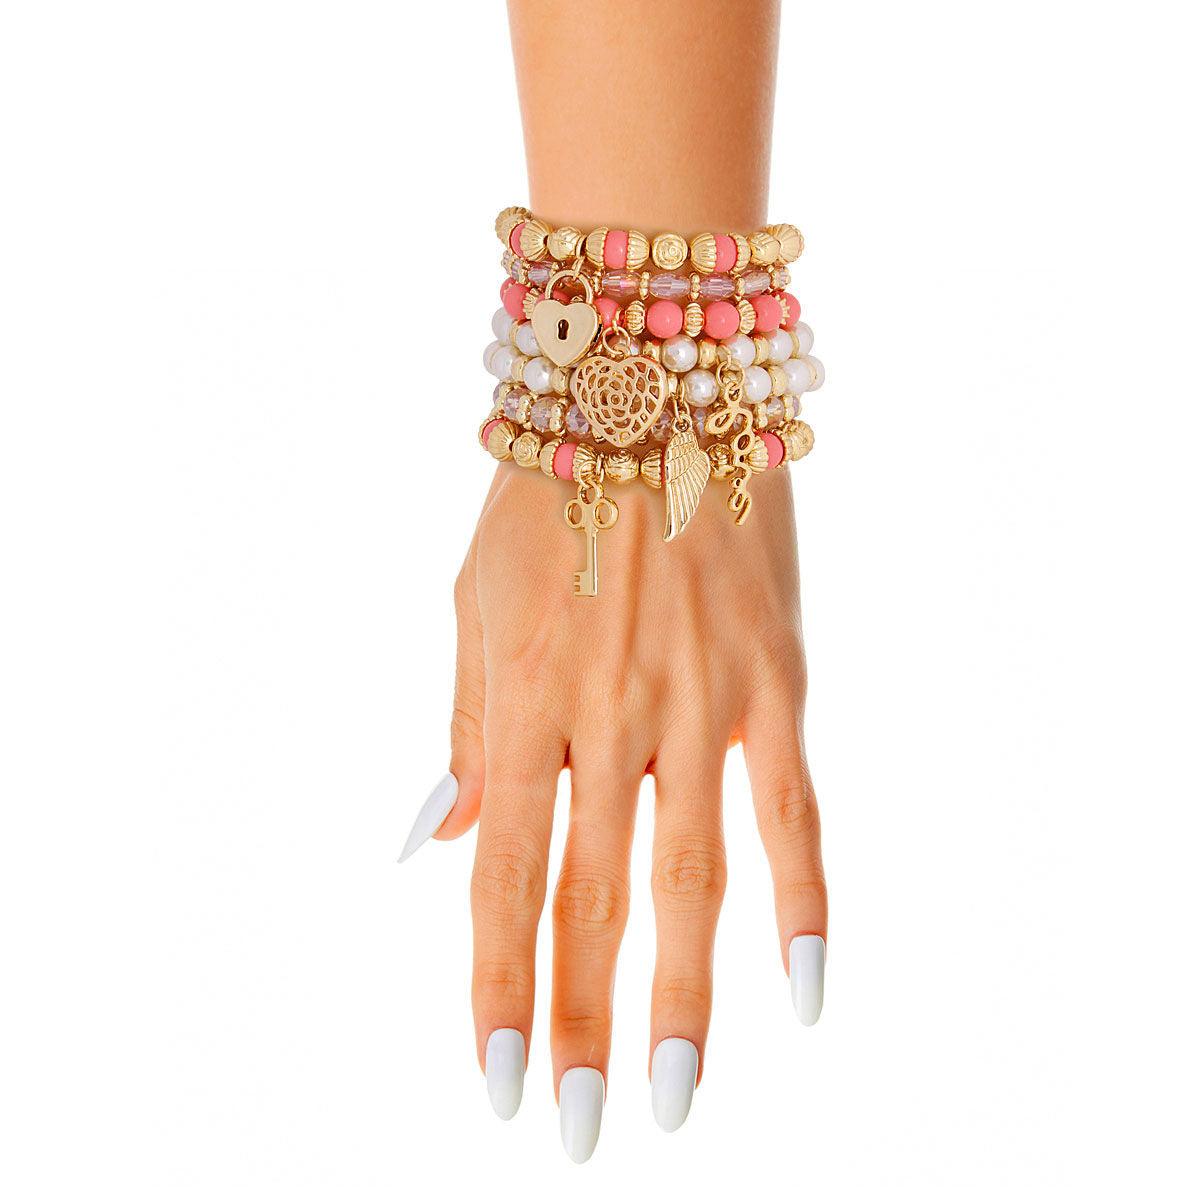 Elegant 7 Piece Gold Tone Beaded Bracelet Set - Perfect for Adding Charm to Your Outfit!